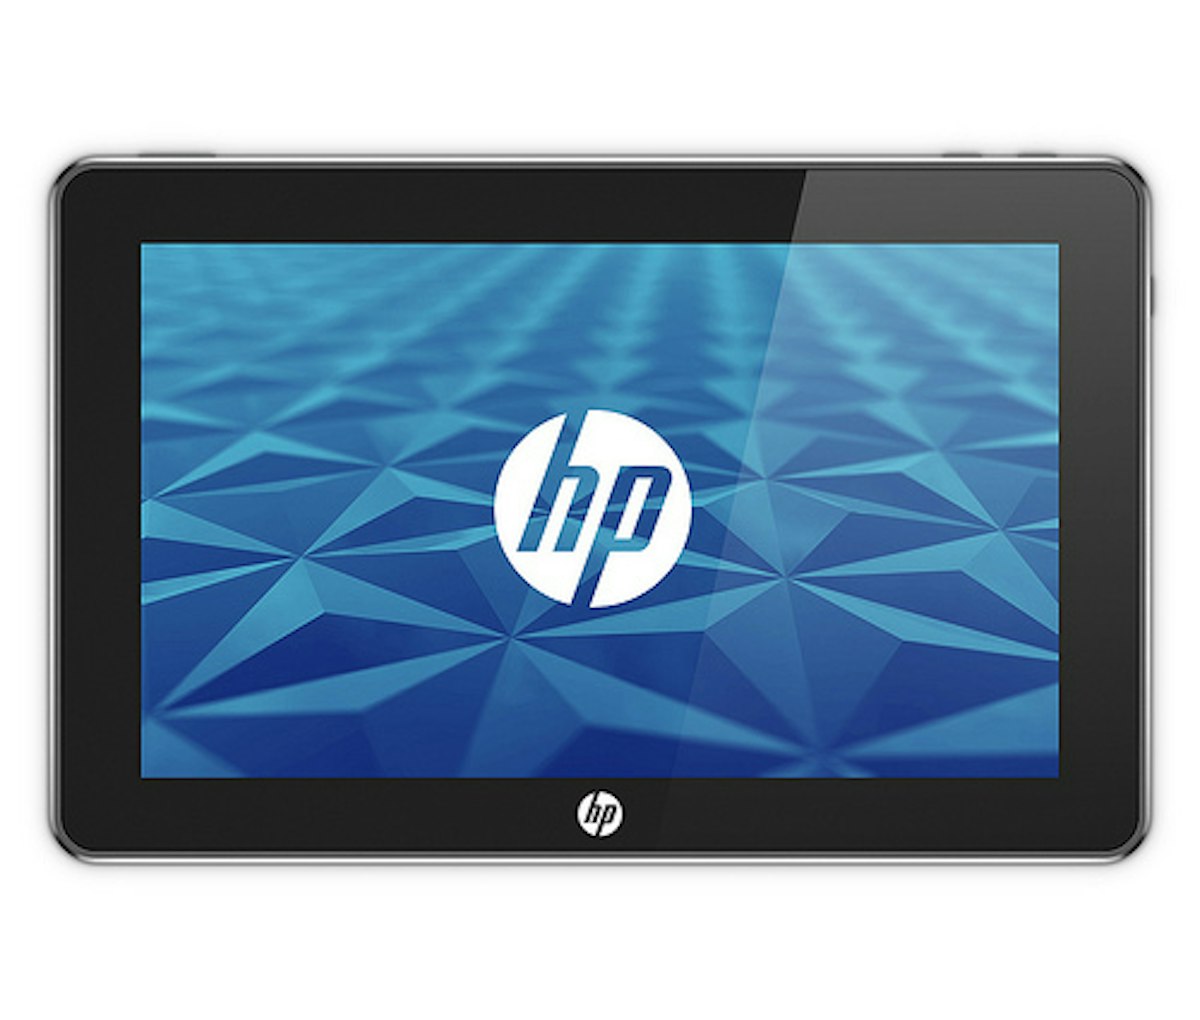  HP Slate Tablet for Small Business